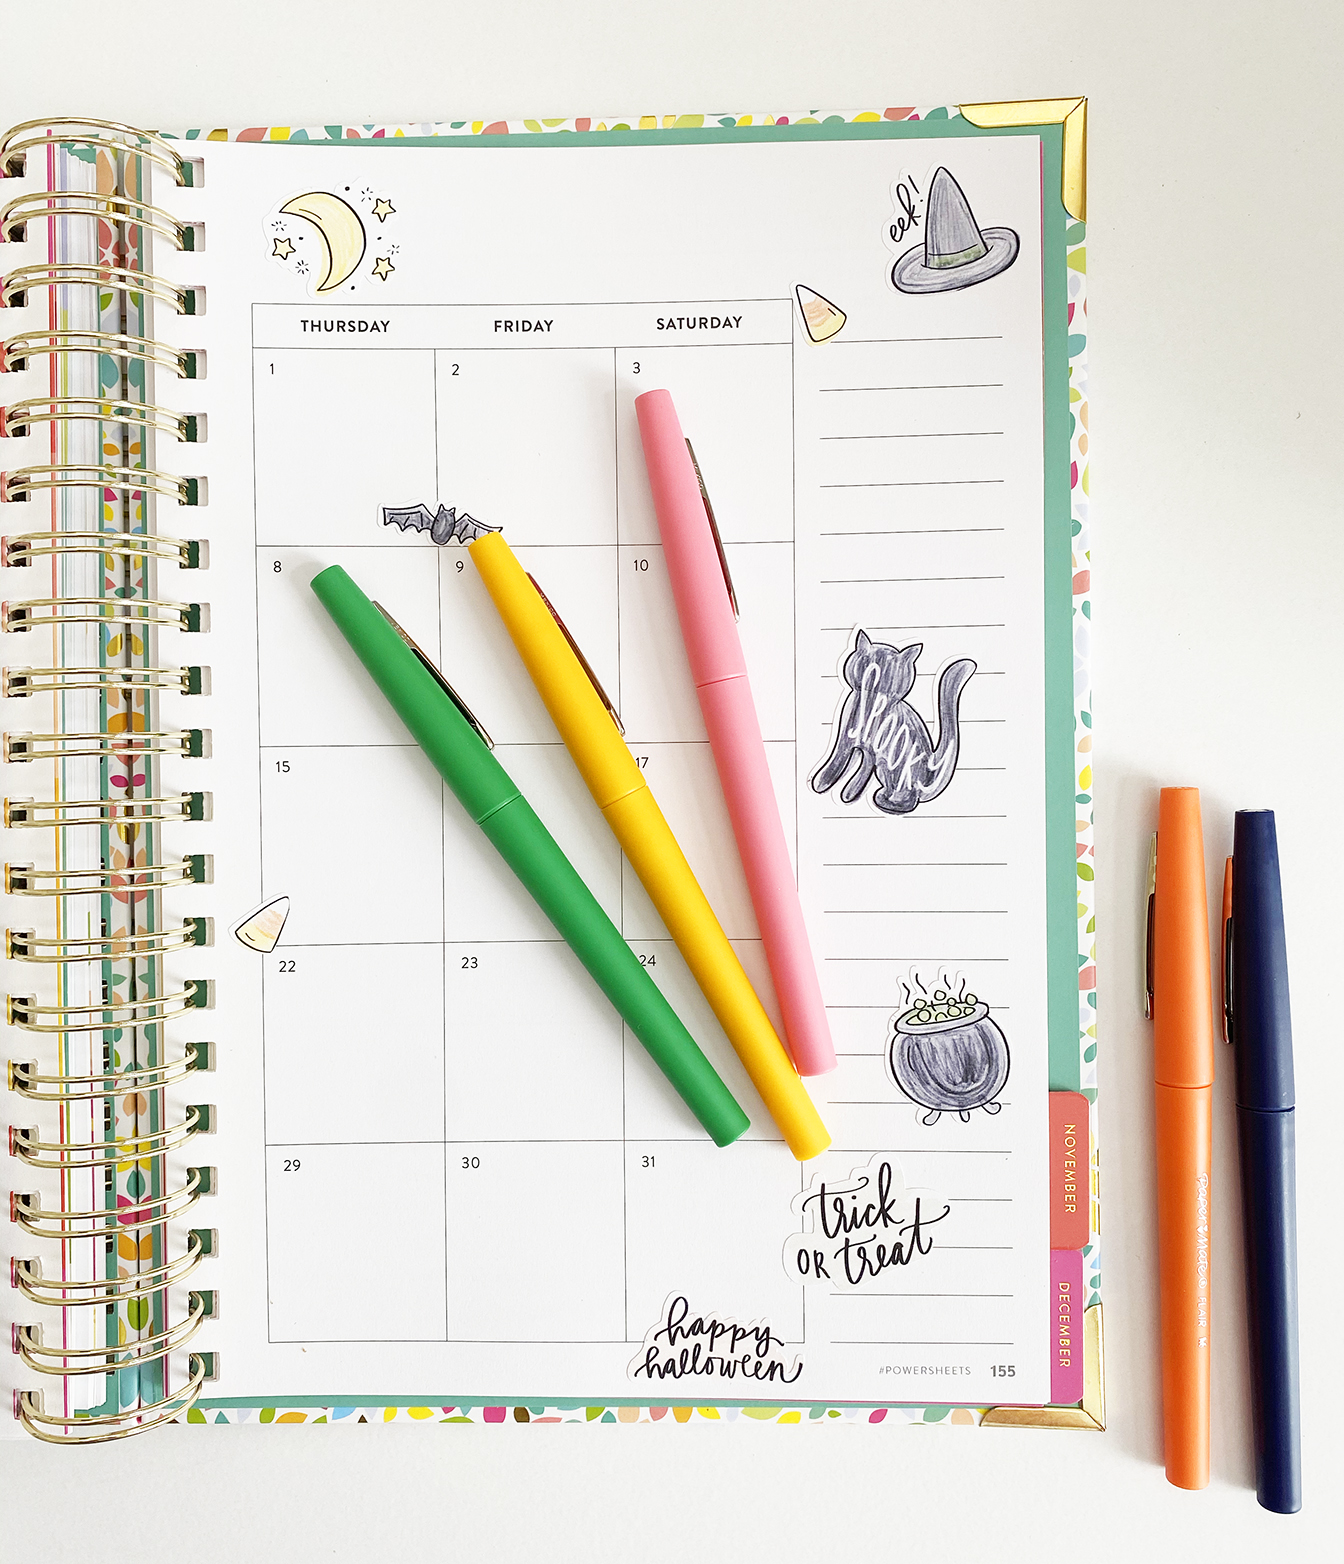 Free Printable Halloween Stickers for your Planner at Pineapple Paper Co.